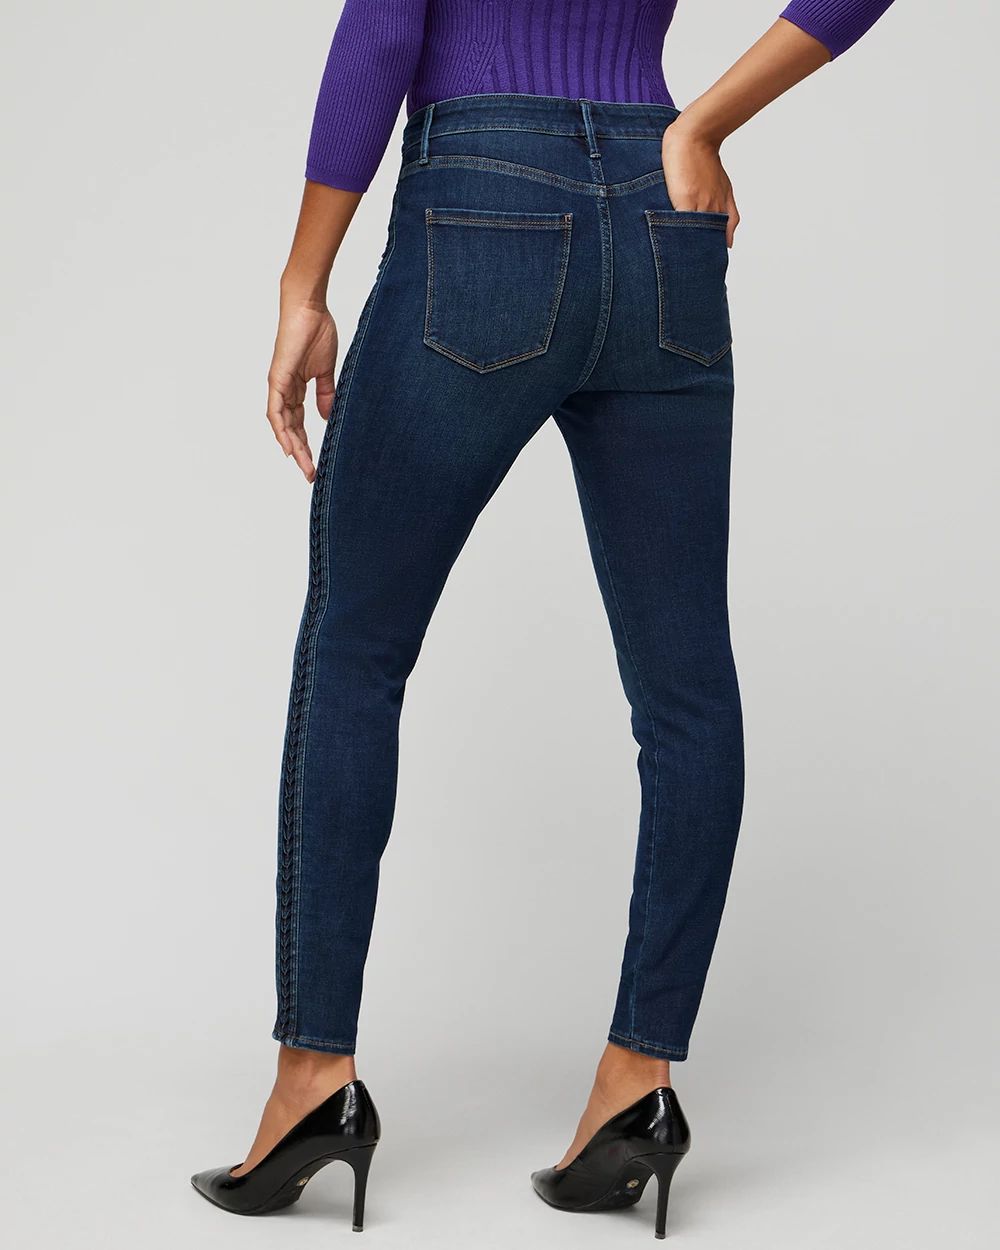 High-Rise Sculpt Pleated Skinny Ankle Jean click to view larger image.